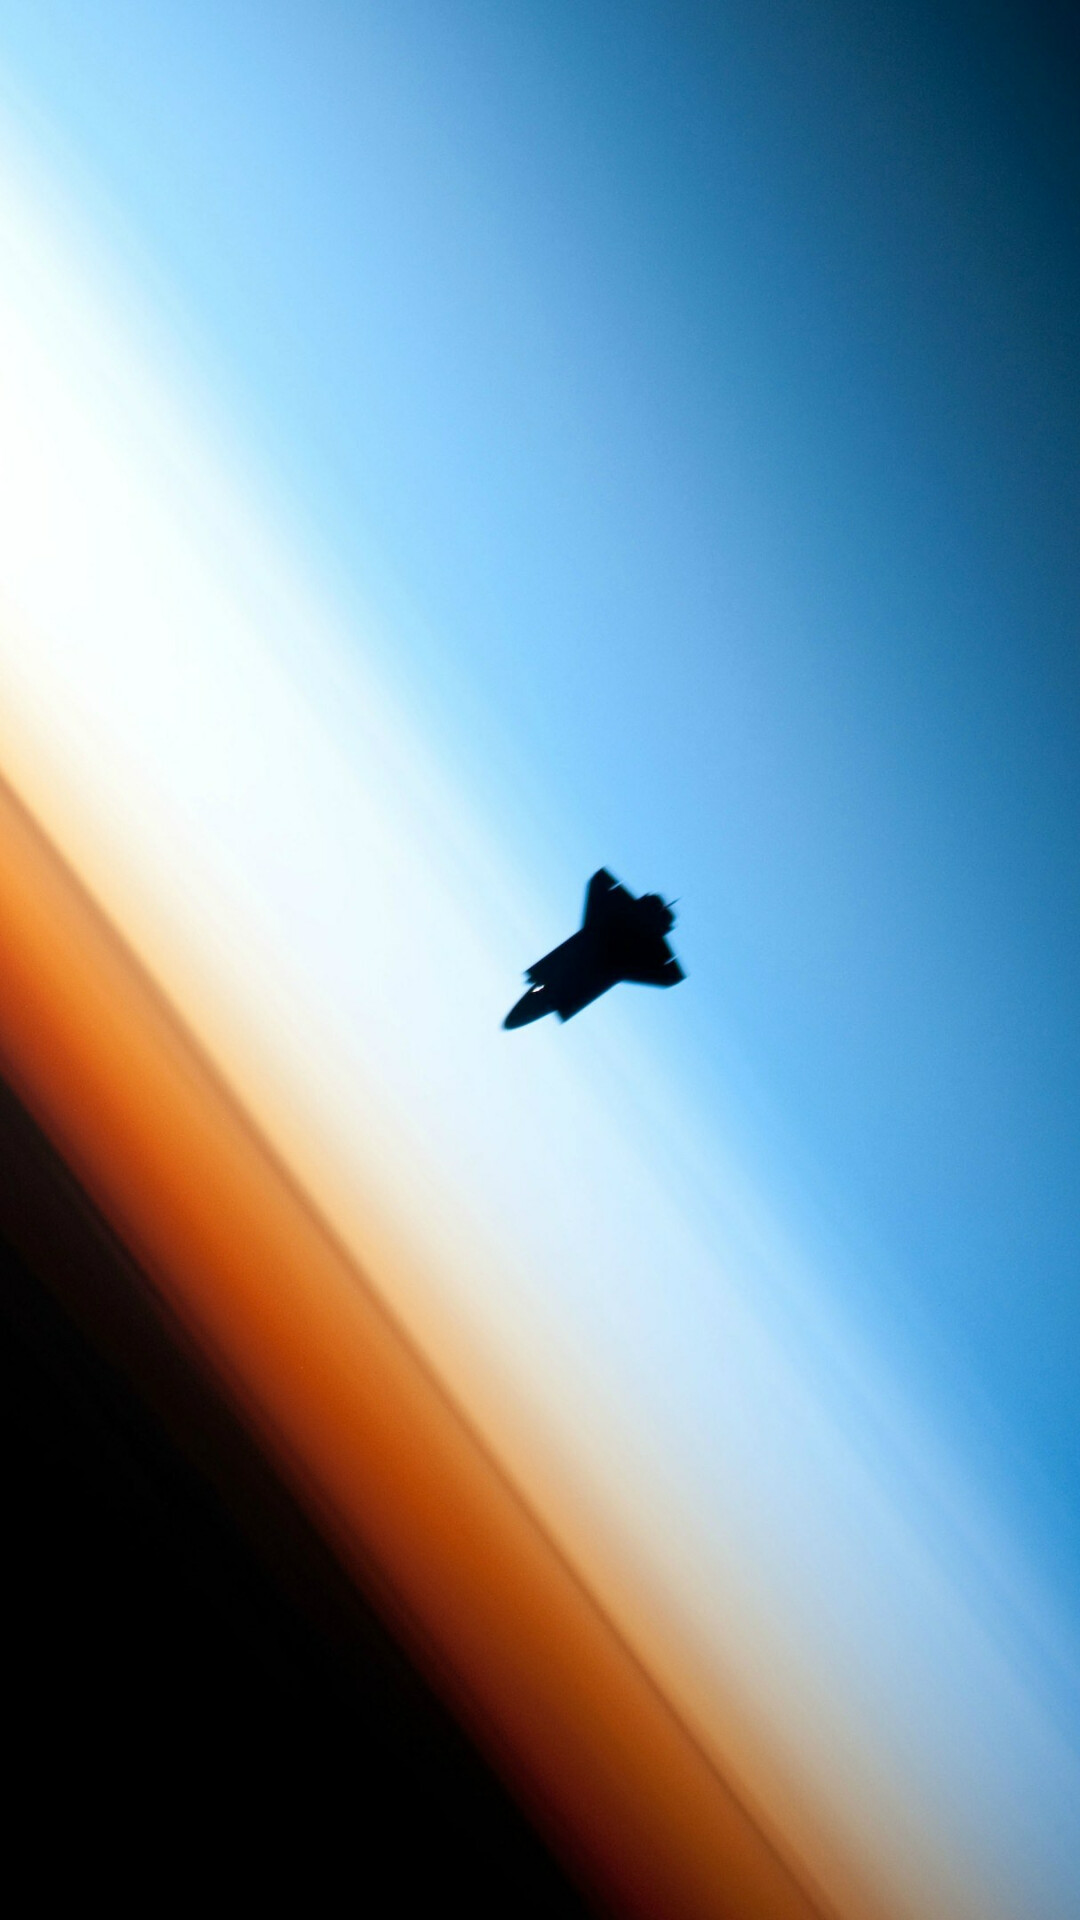 Space Shuttle: Columbia was destroyed during re-entry in 2003, Silhouette, Horizon. 1080x1920 Full HD Background.